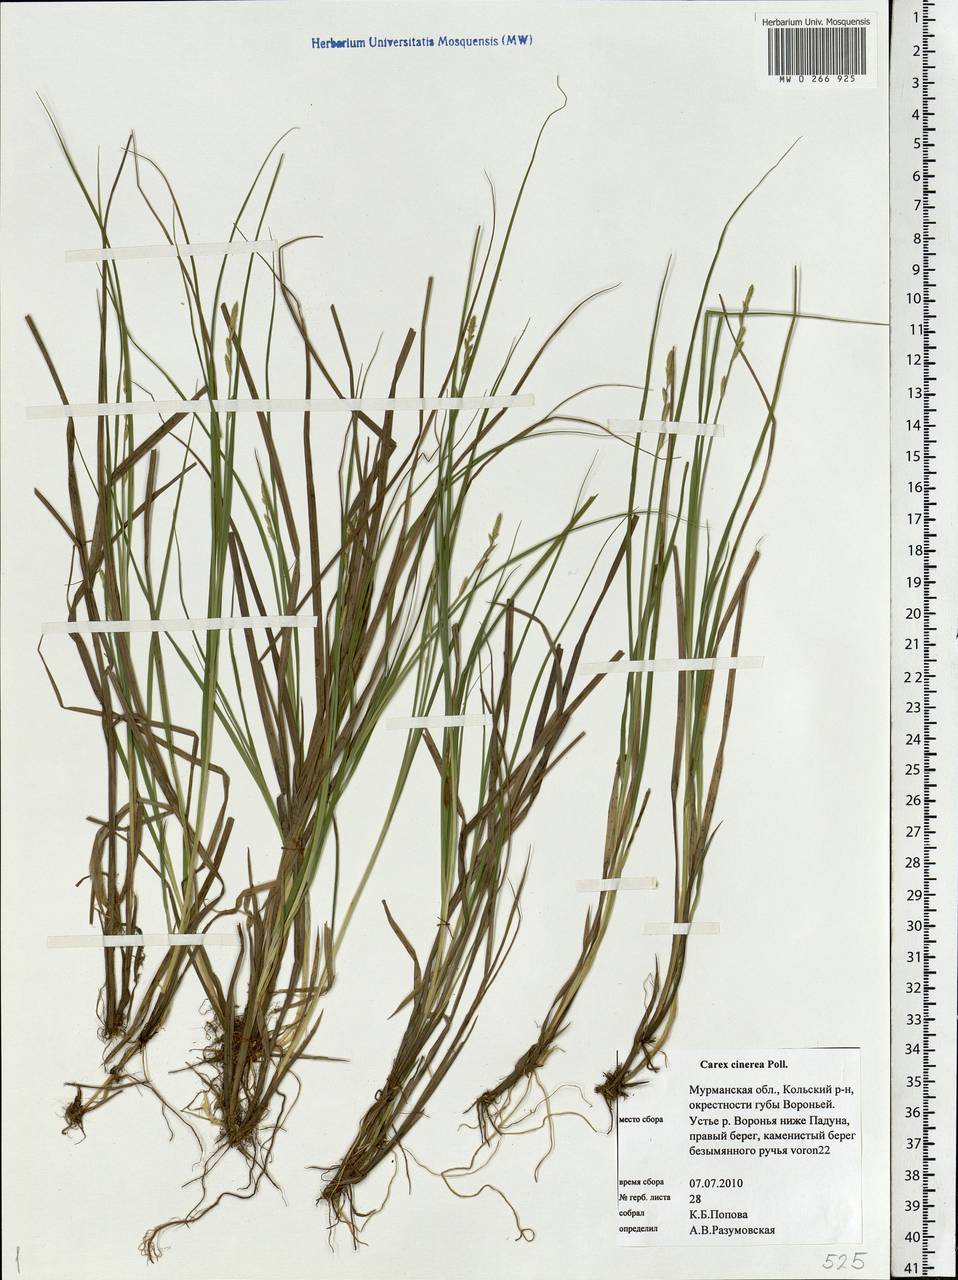 Carex canescens subsp. canescens, Eastern Europe, Northern region (E1) (Russia)